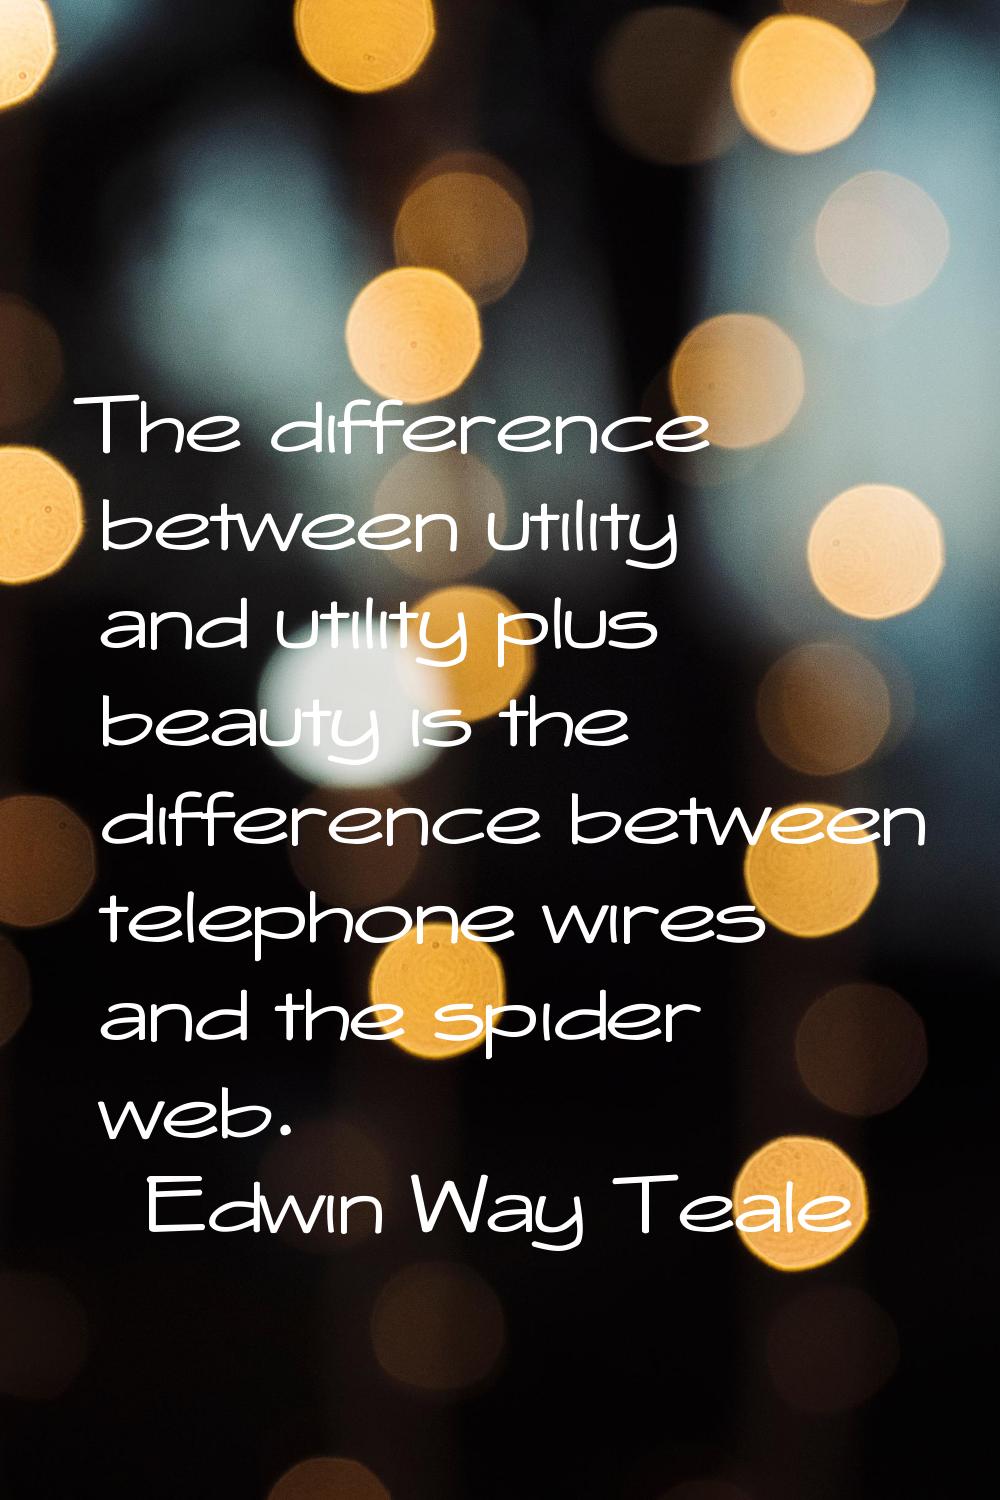 The difference between utility and utility plus beauty is the difference between telephone wires an